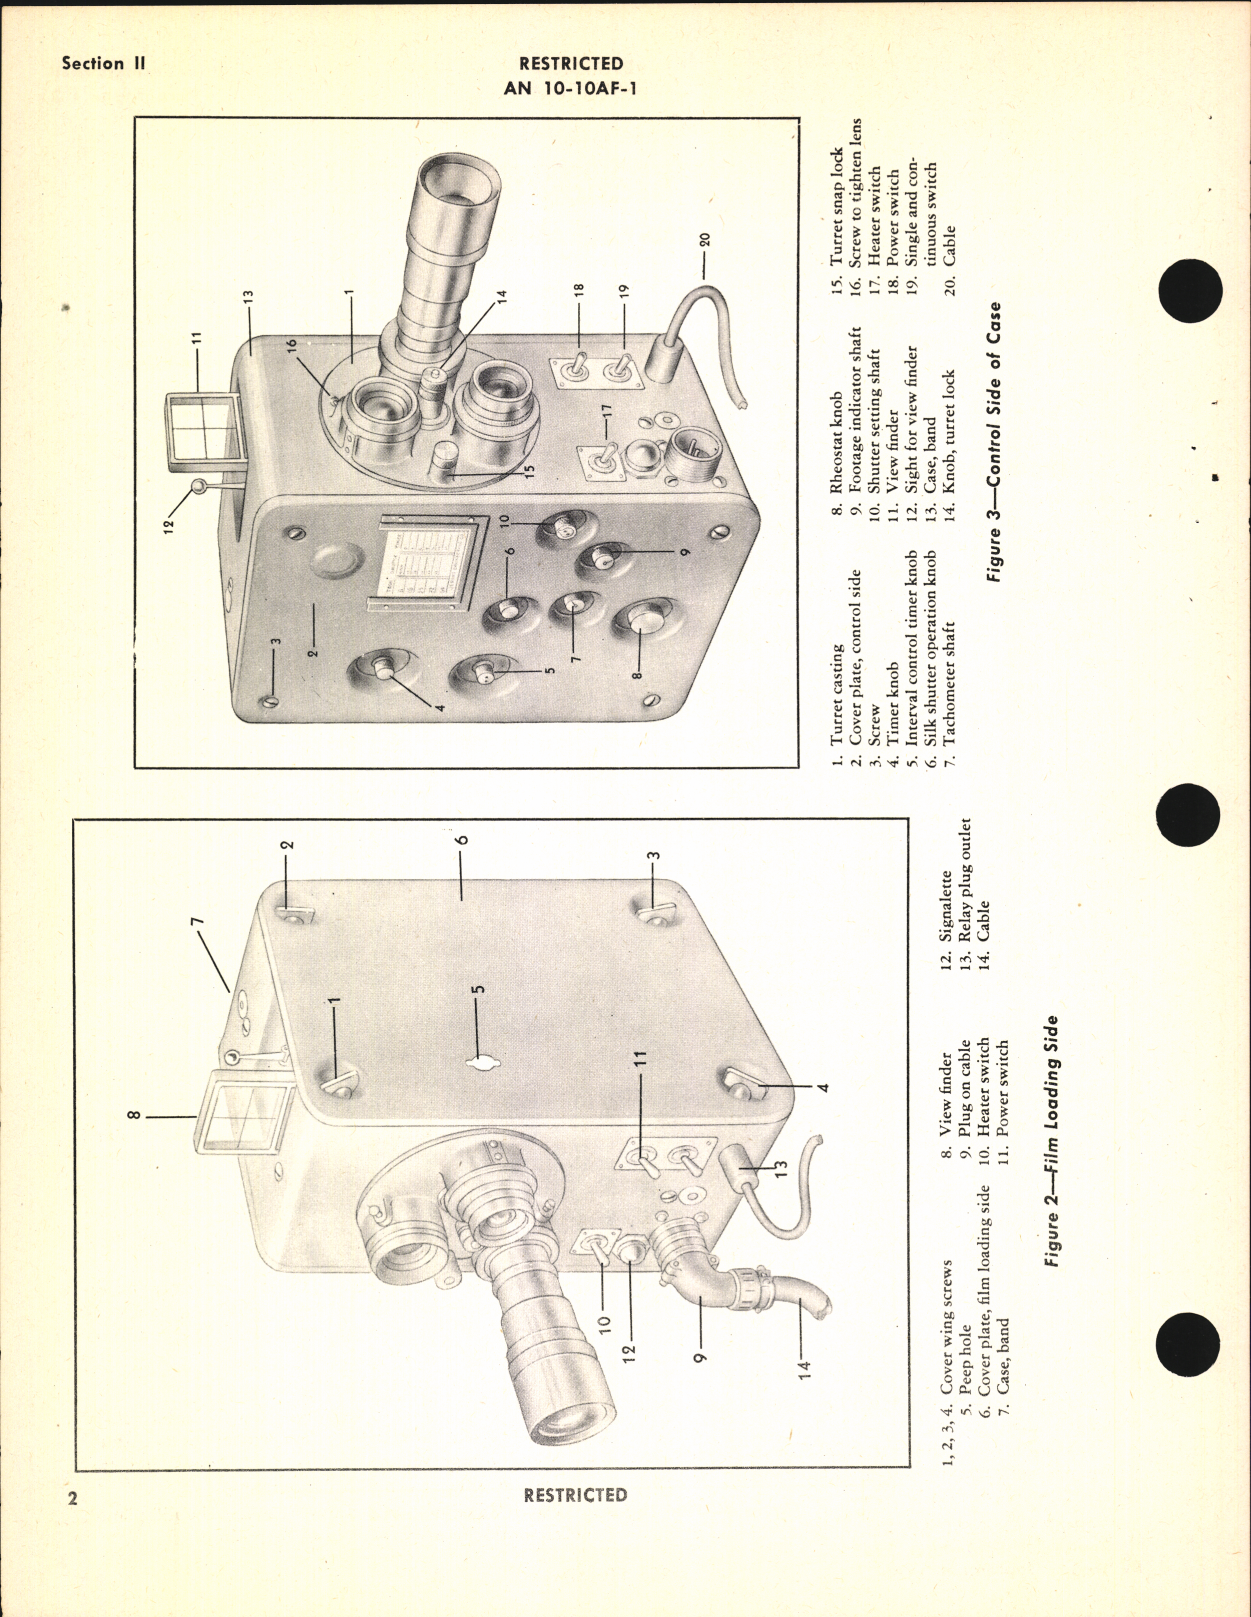 Sample page 6 from AirCorps Library document: Operation, Service, & Overhaul Instructions with Parts Catalog for Data Recording Camera Model B-2